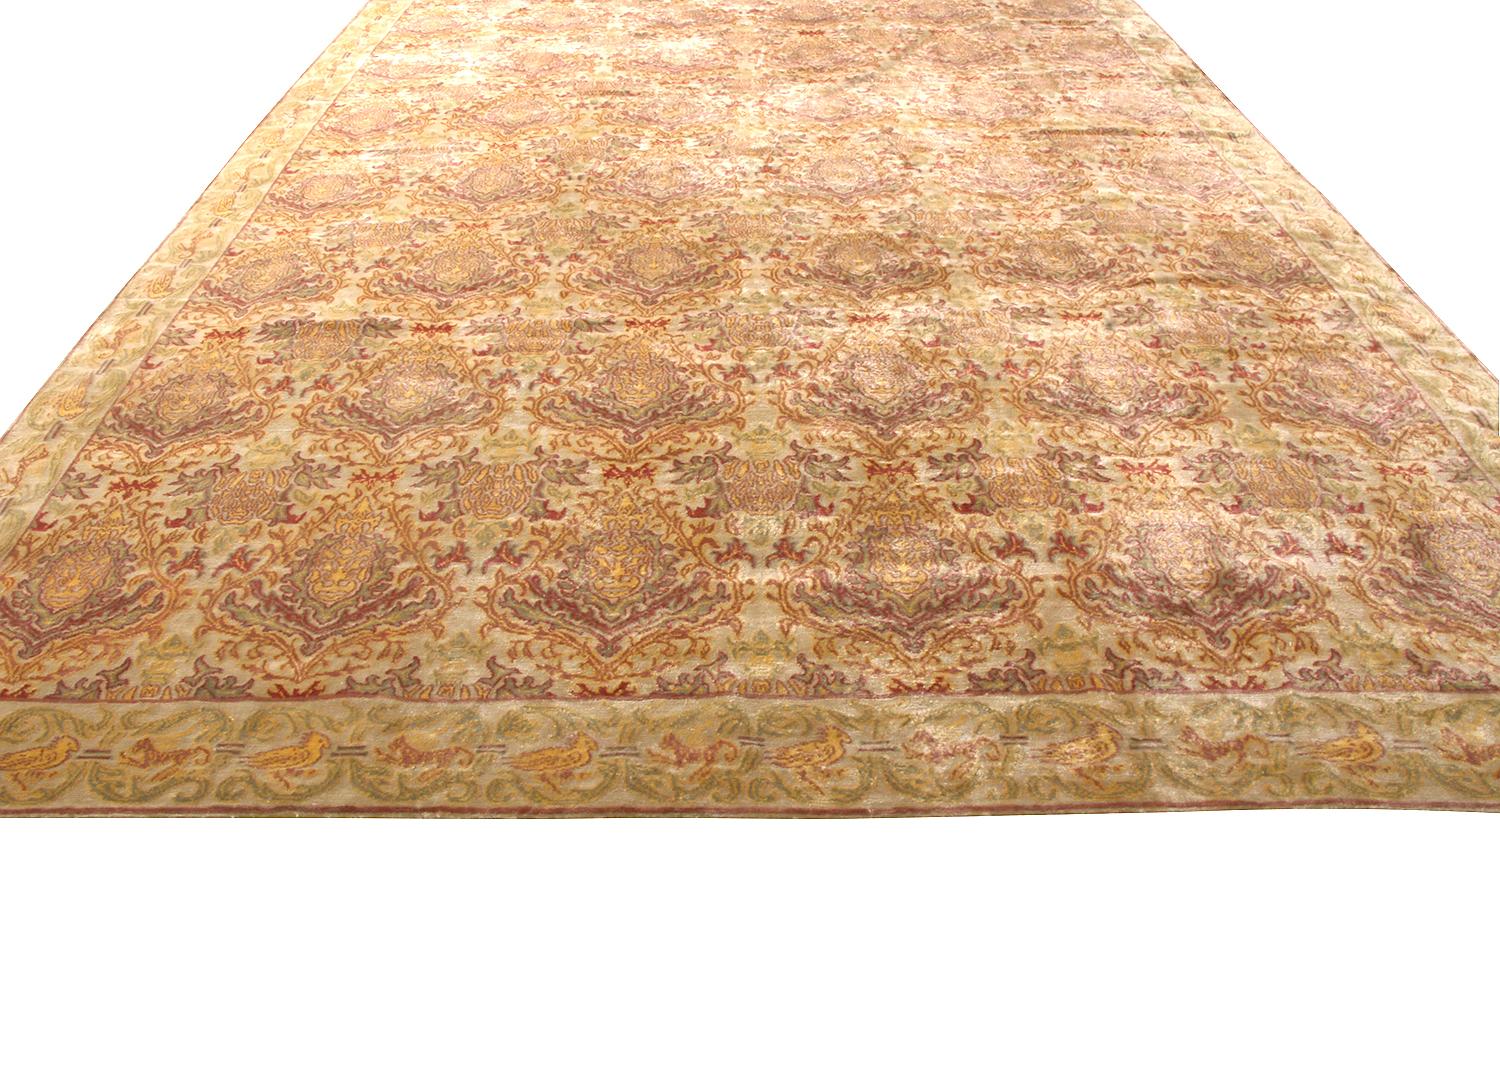 Connoting Spanish sensibilities, this 10 x 14 all silk drawing from Rug & Kilim’s European collection features a lavish “Granada” design with an all over floral pattern in forest green, maroon and pale yellow against gold—all exemplifying the light